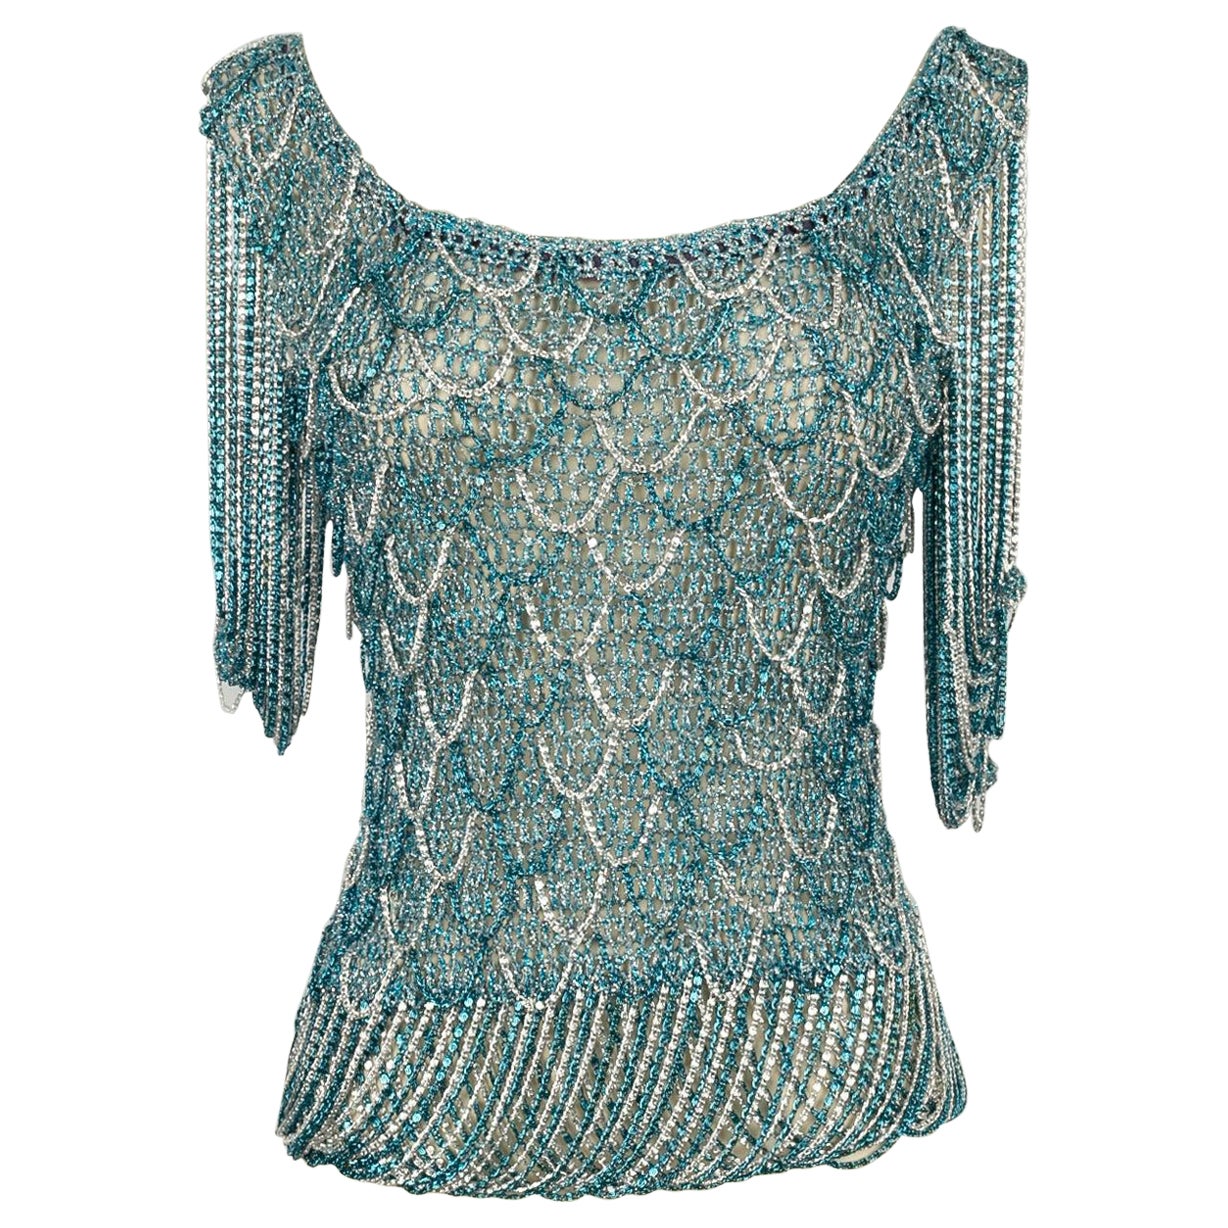 Azzaro Mesh Top in Blue and Silver Lurex, 1970s For Sale